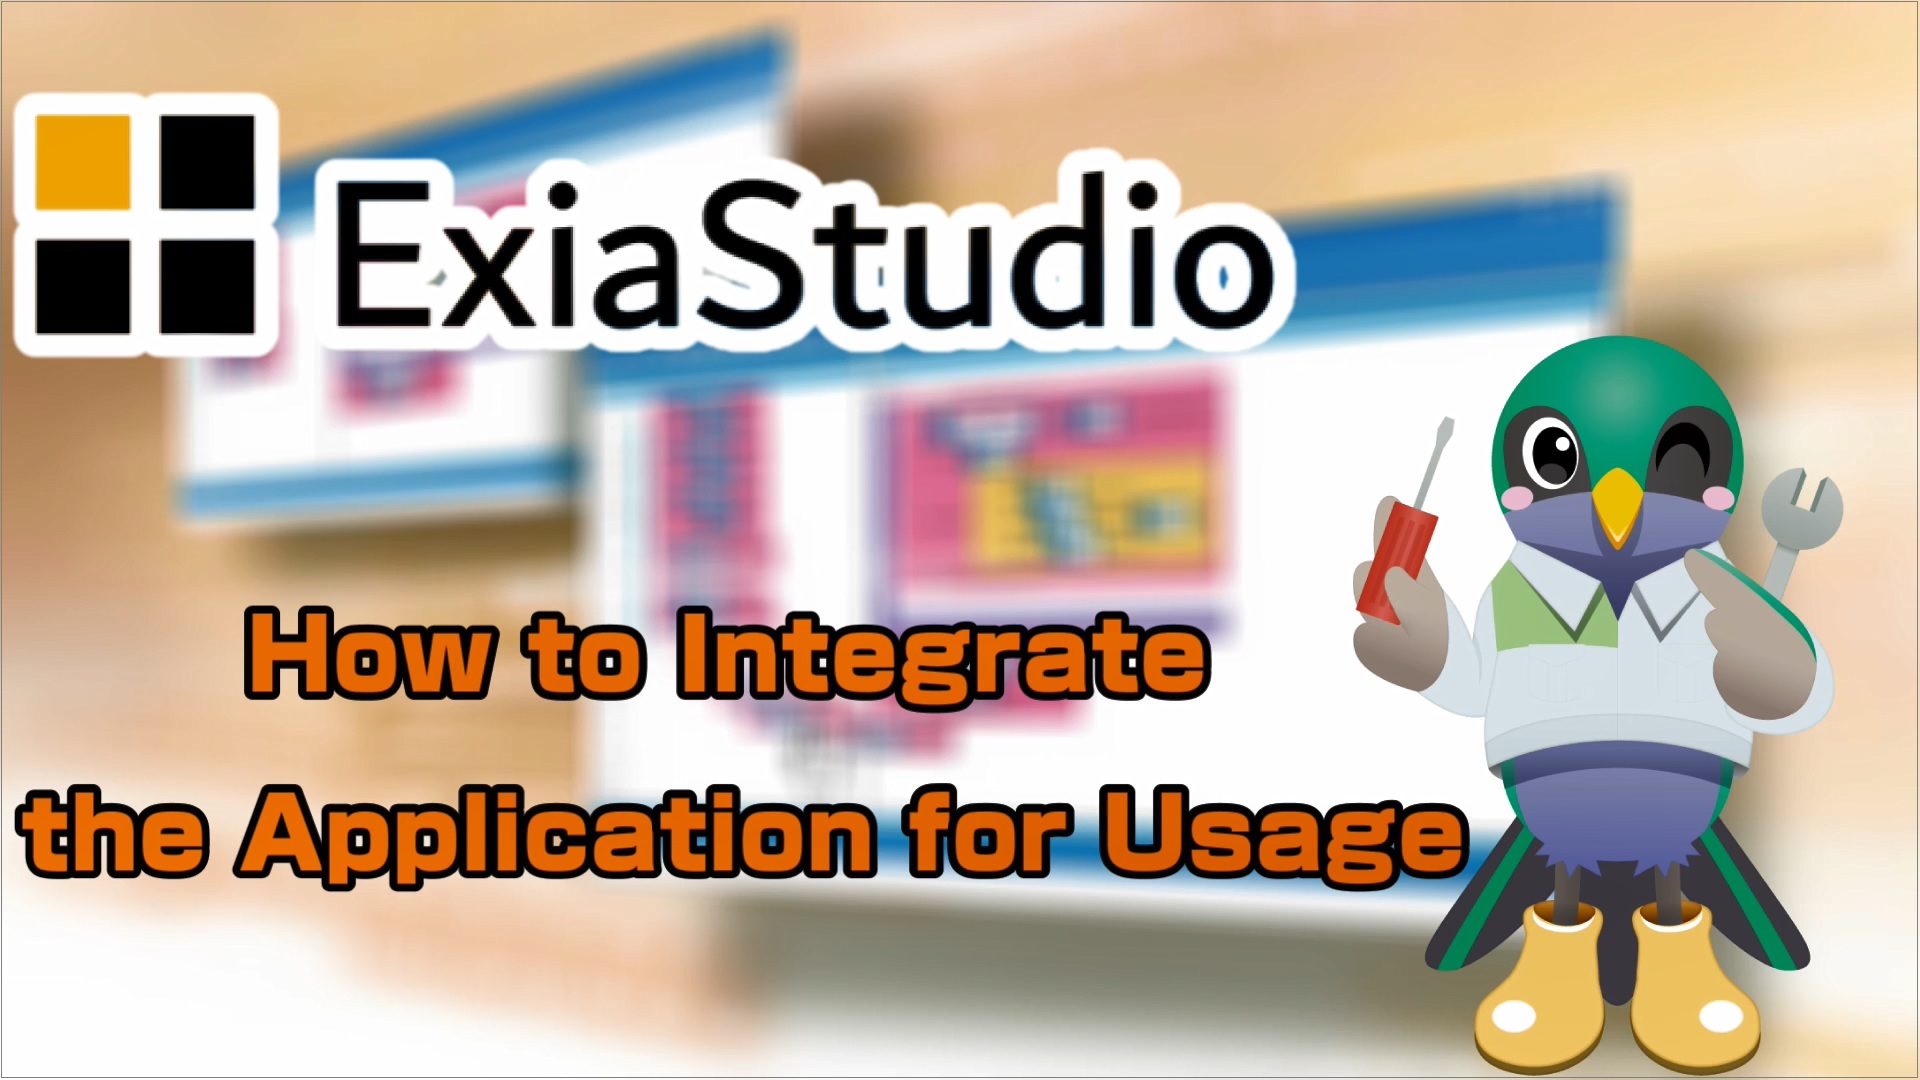 ExiaStudio How to integrate the Application for Usage